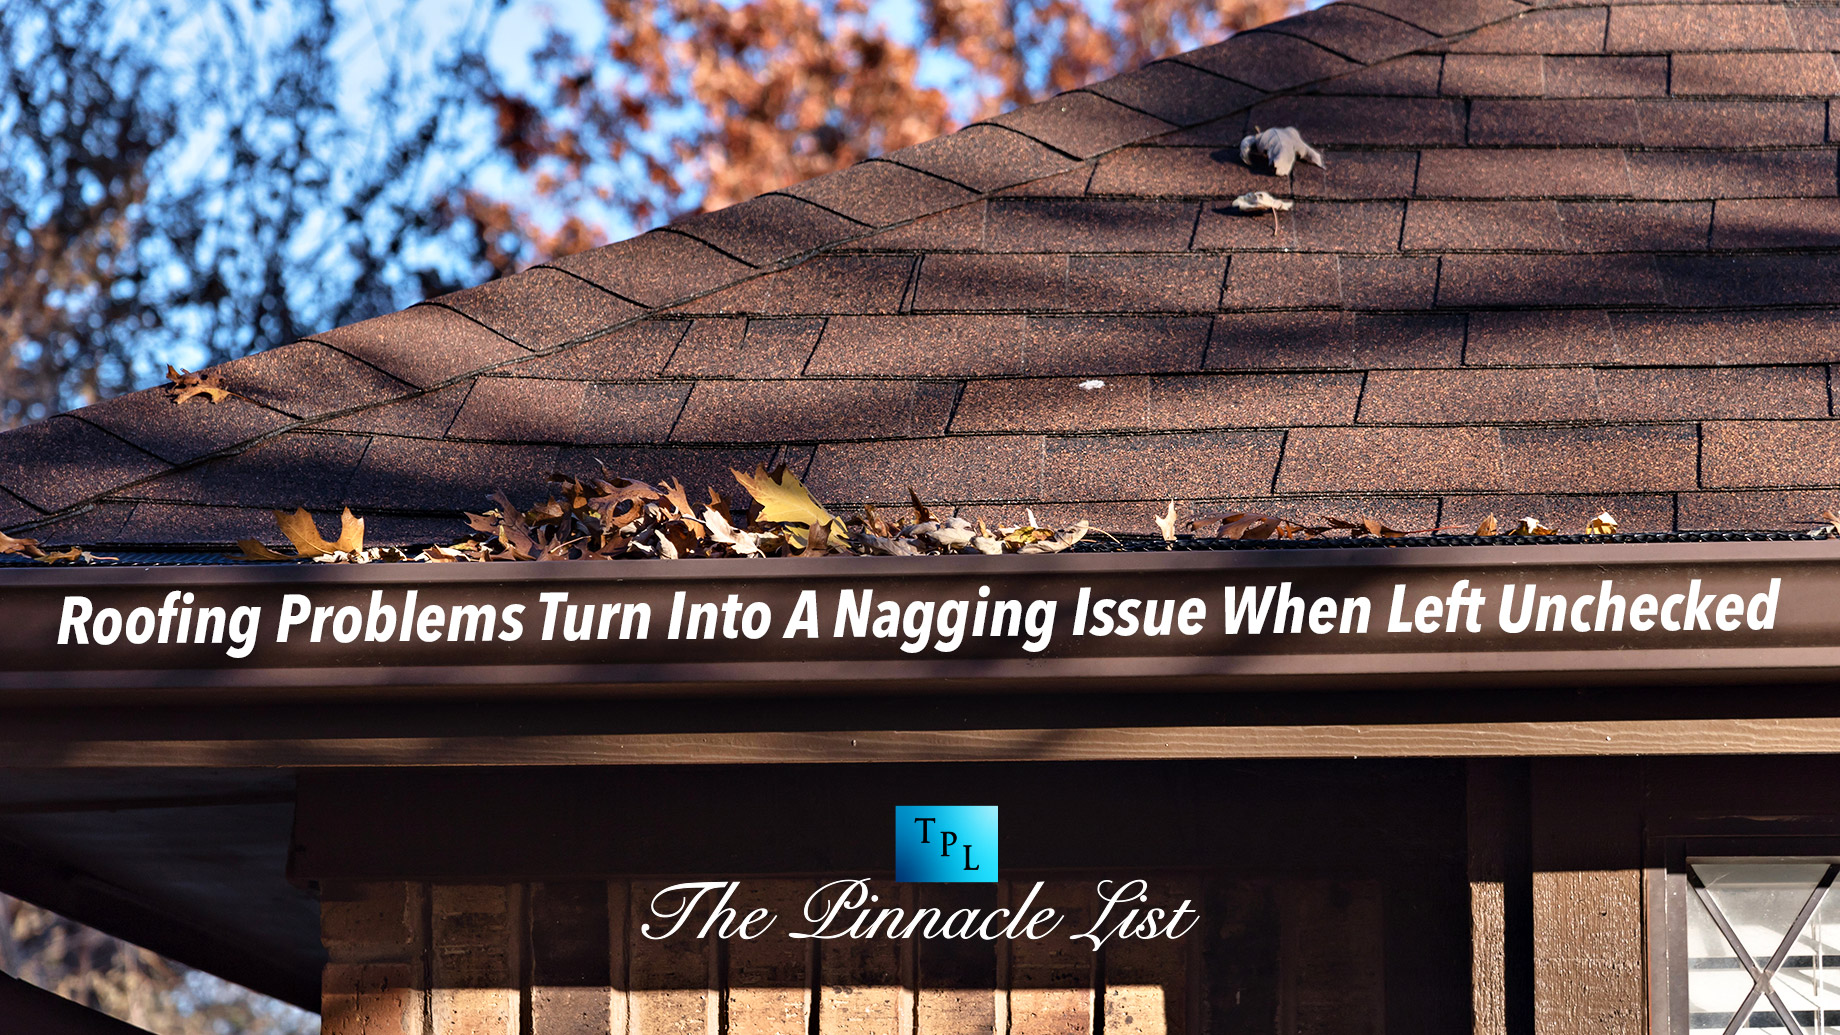 Roofing Problems Turn Into A Nagging Issue When Left Unchecked